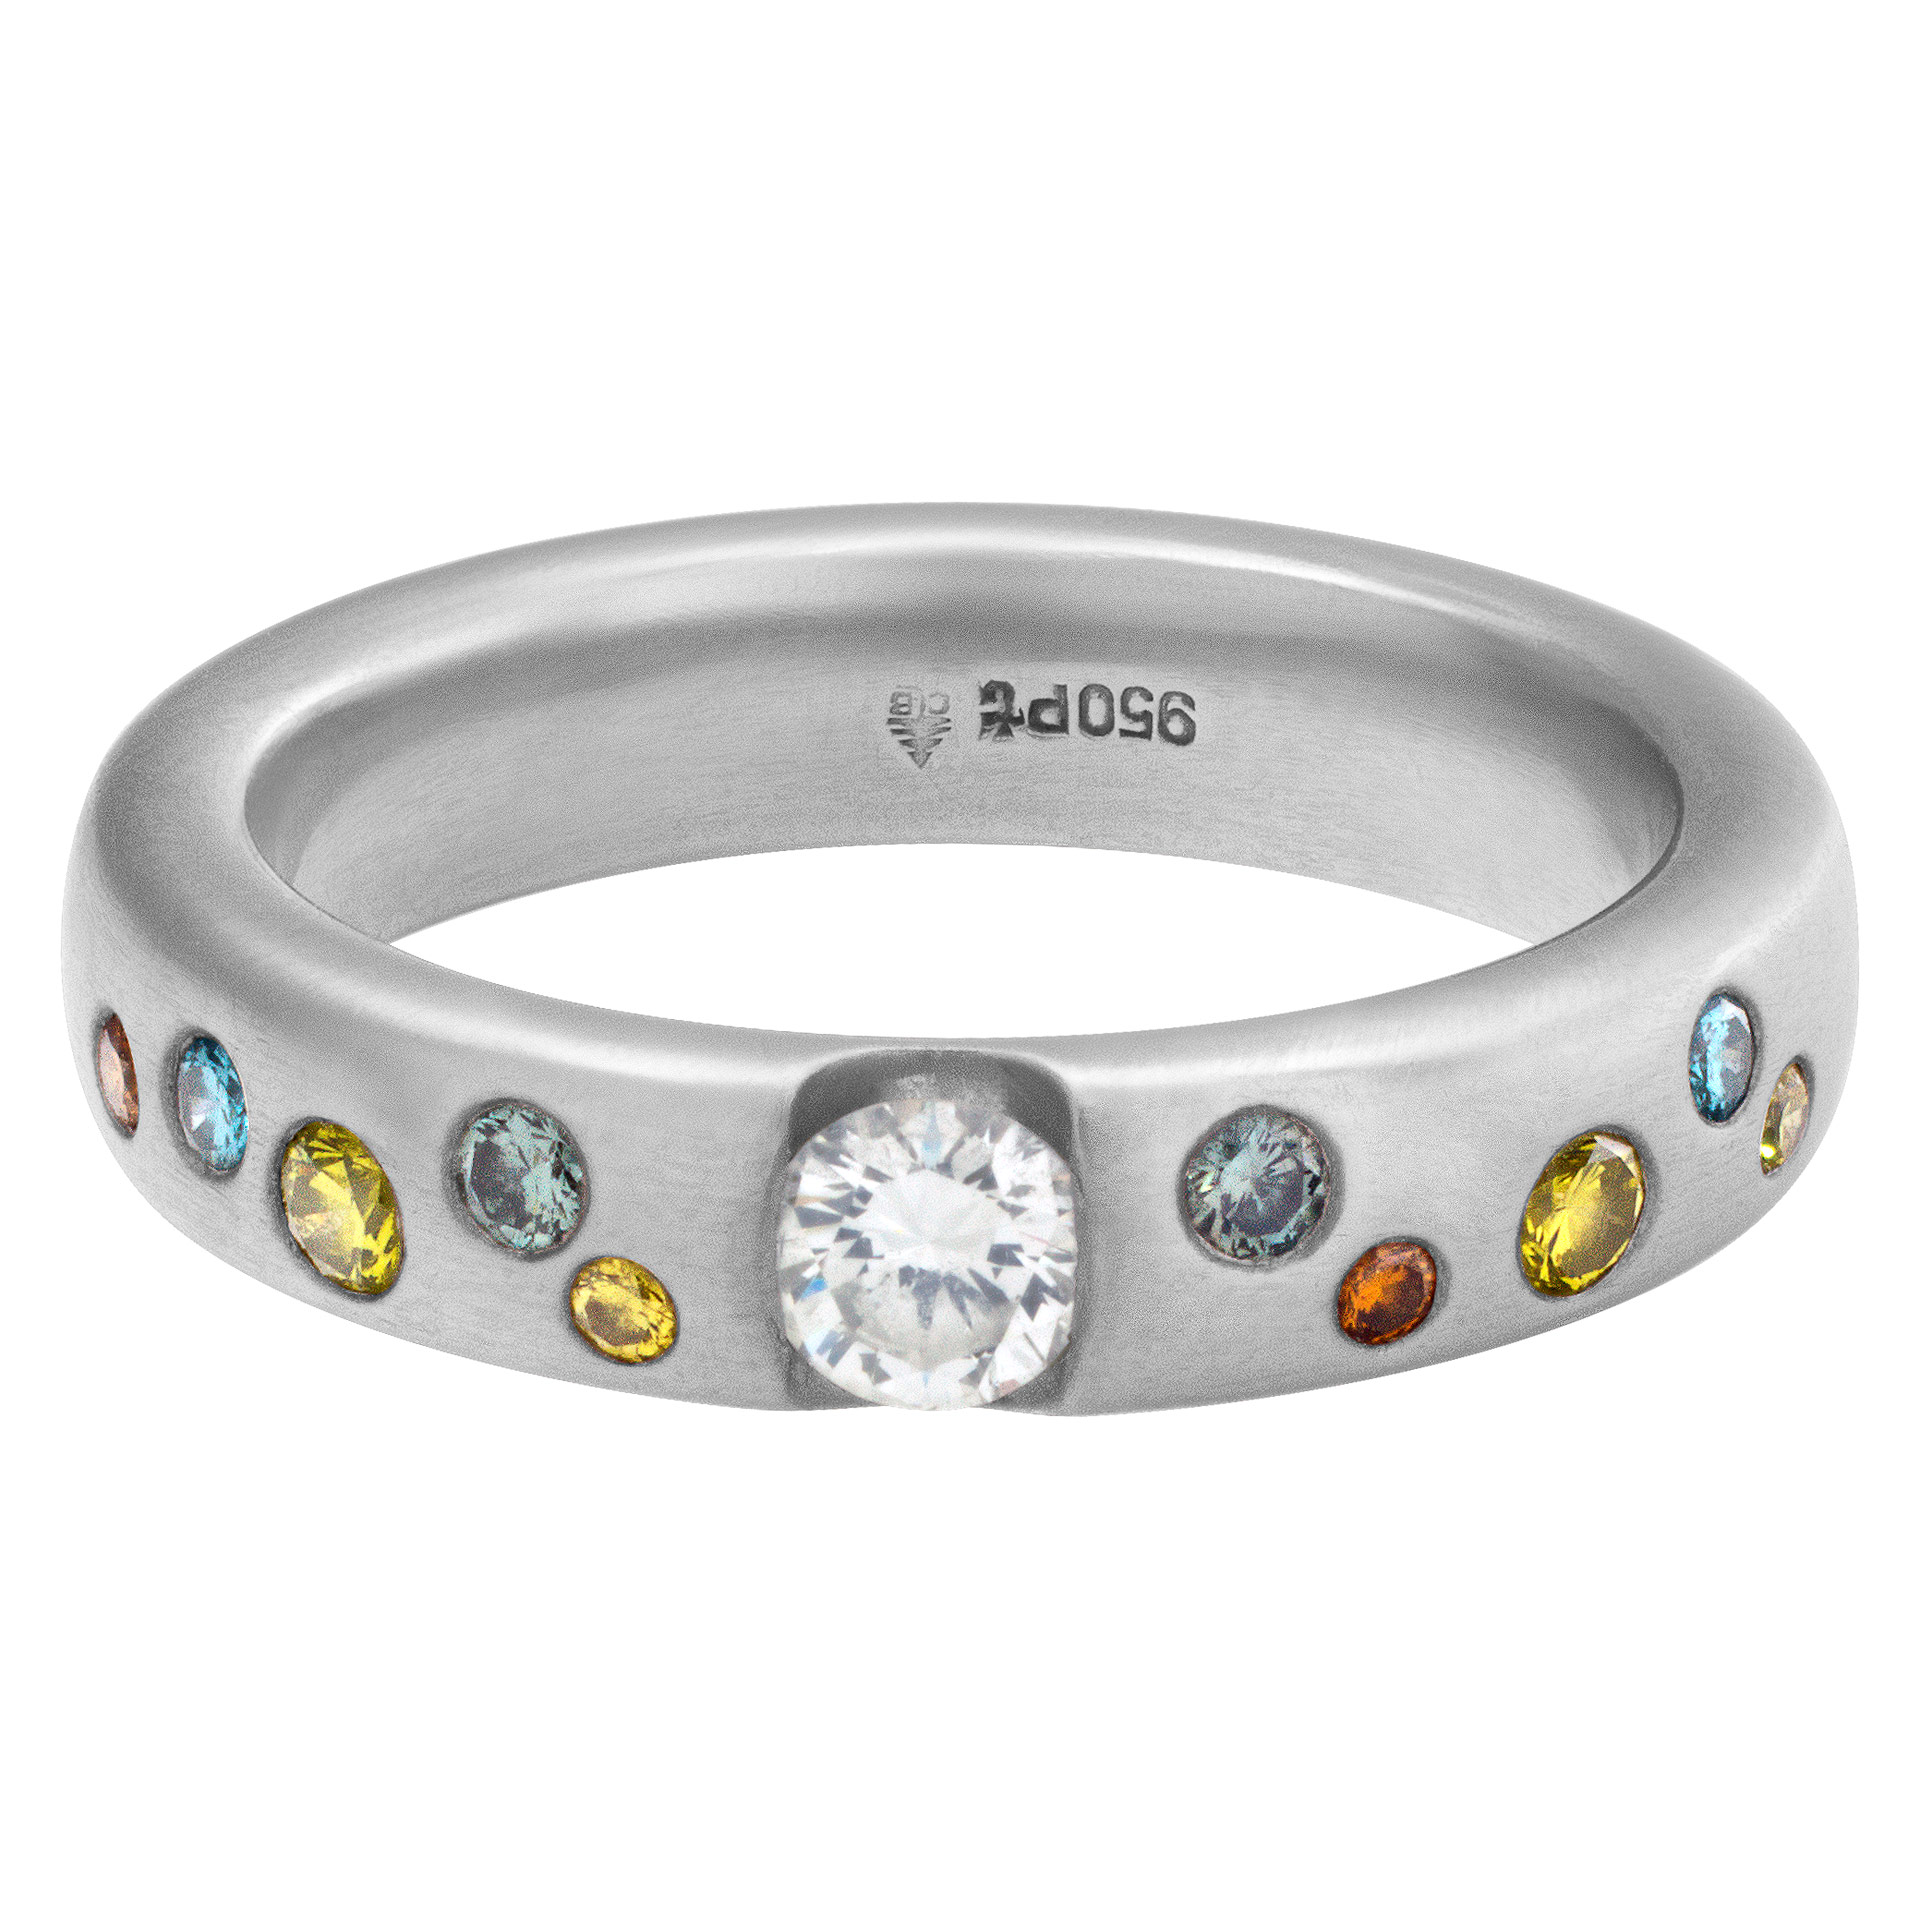 Platinum band with center white diamond and multi colored irradiated diamonds